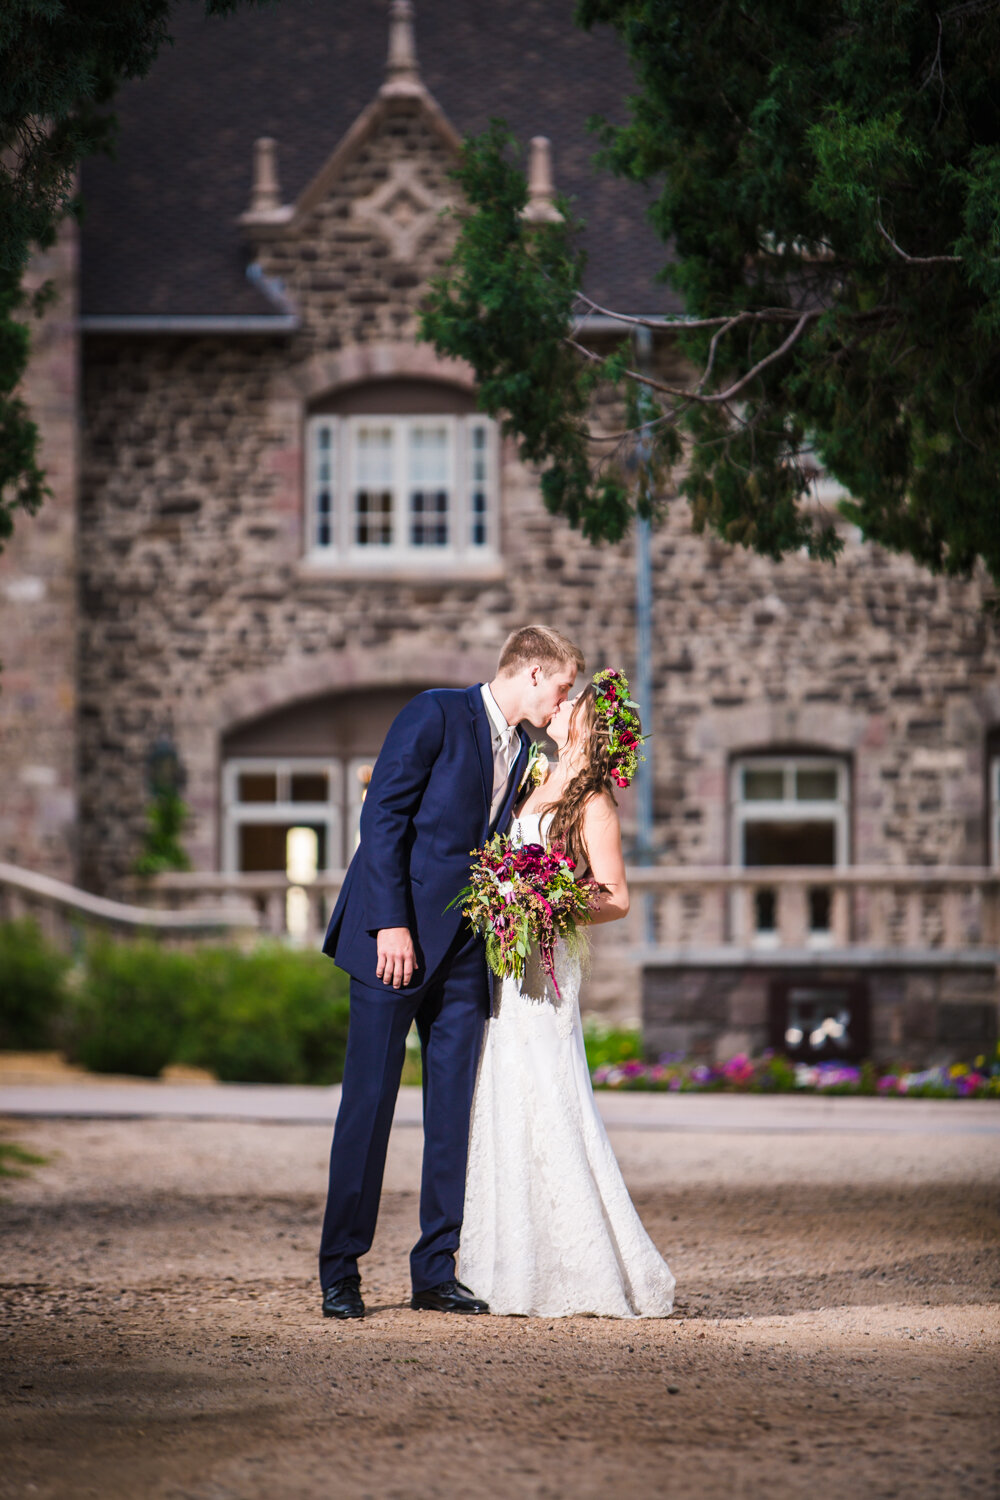  Bride and groom outside Highlands Ranch Mansion.  hotographed by JMGant Photography, Denver Colorado wedding photographer.&nbsp; 